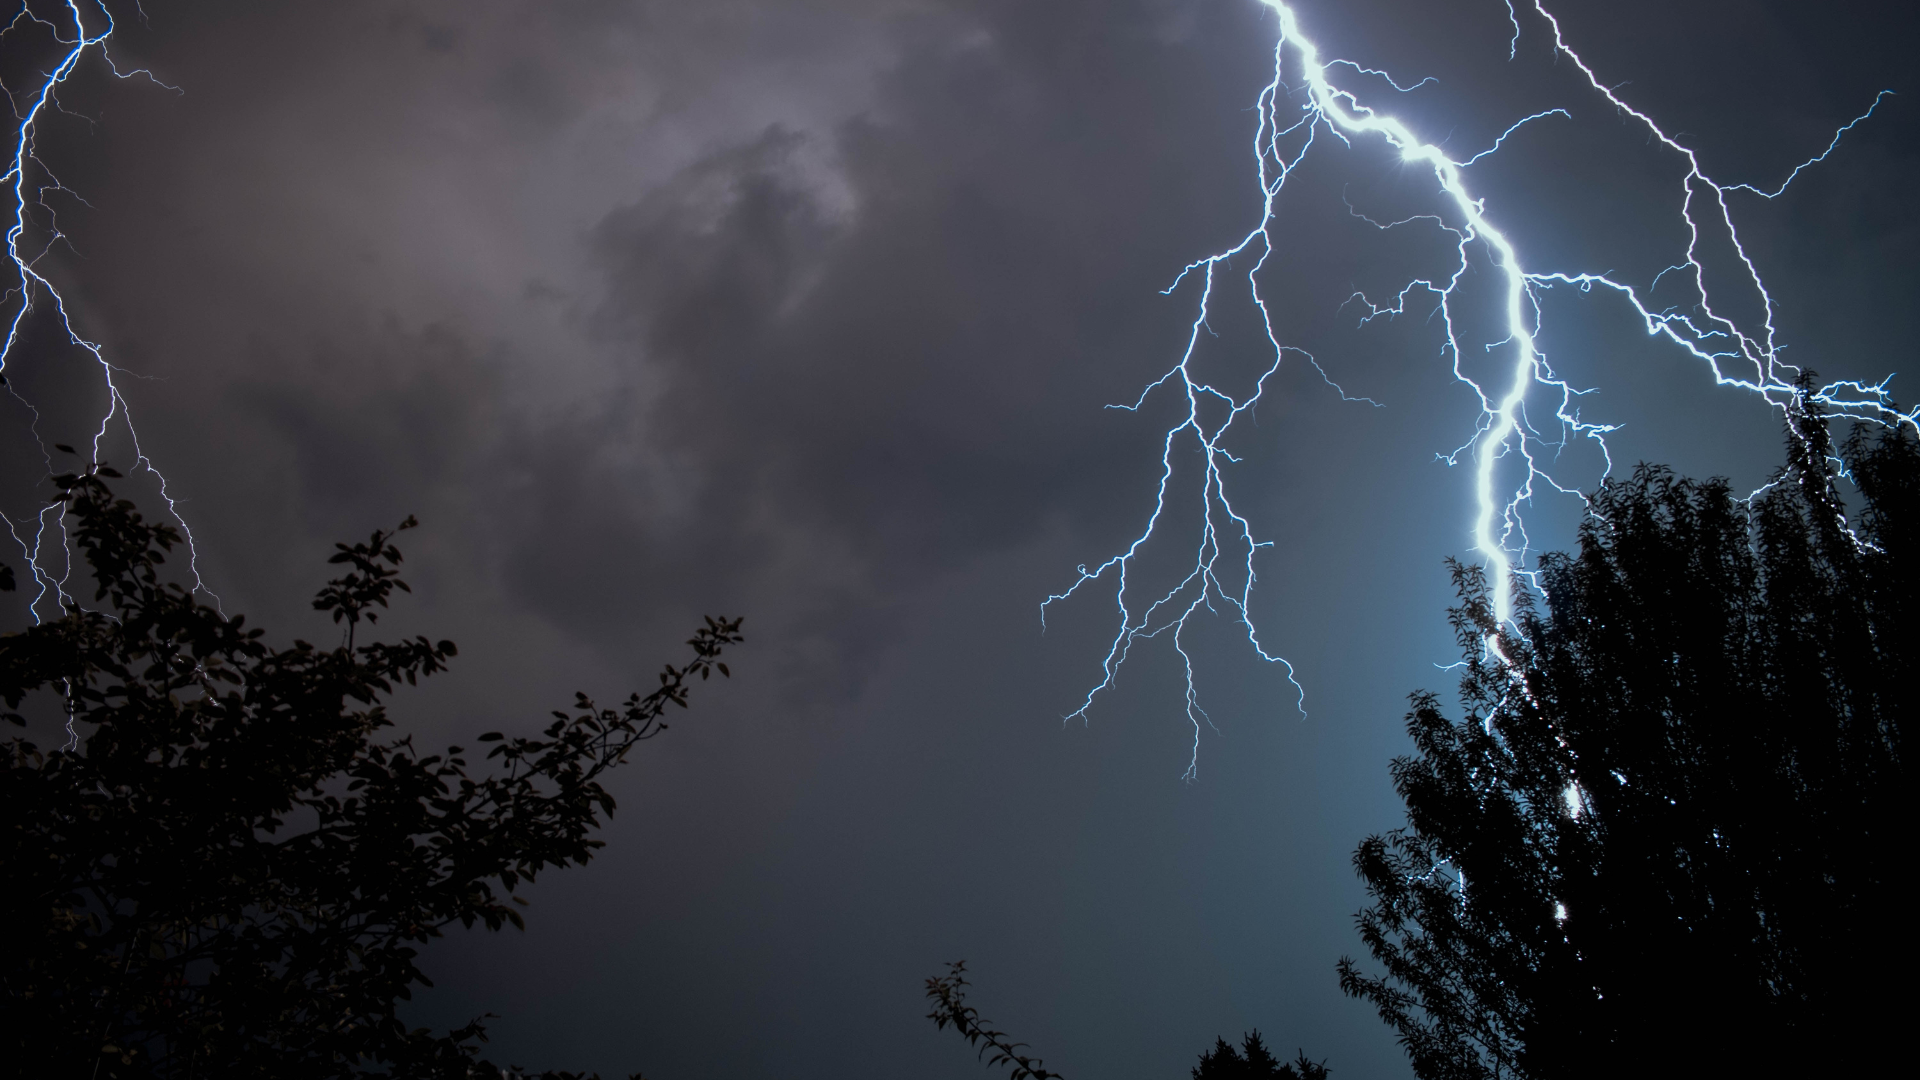 Woman hit by lightning loses synaesthesia – but then it returns